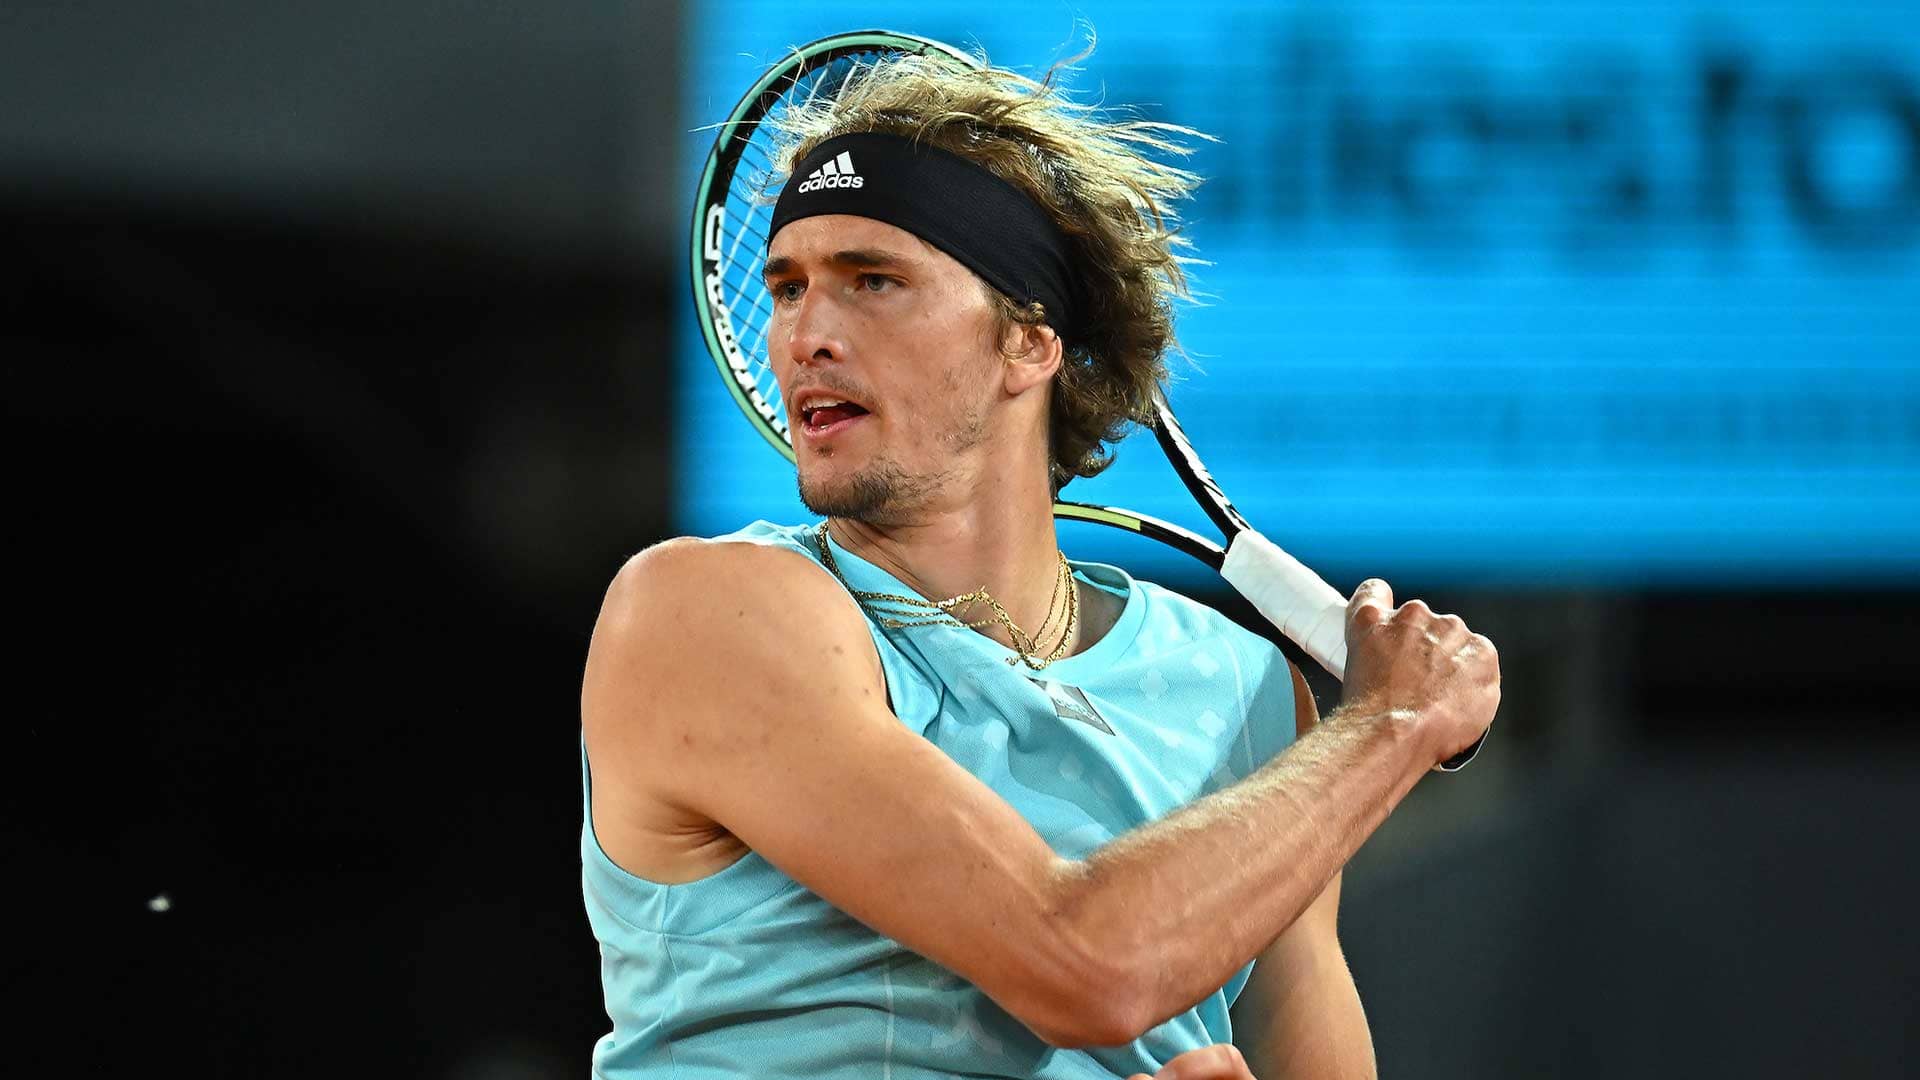 Alexander Zverev Overcomes Serving Woes To Close Out Felix Auger-Aliassime ATP Tour Tennis